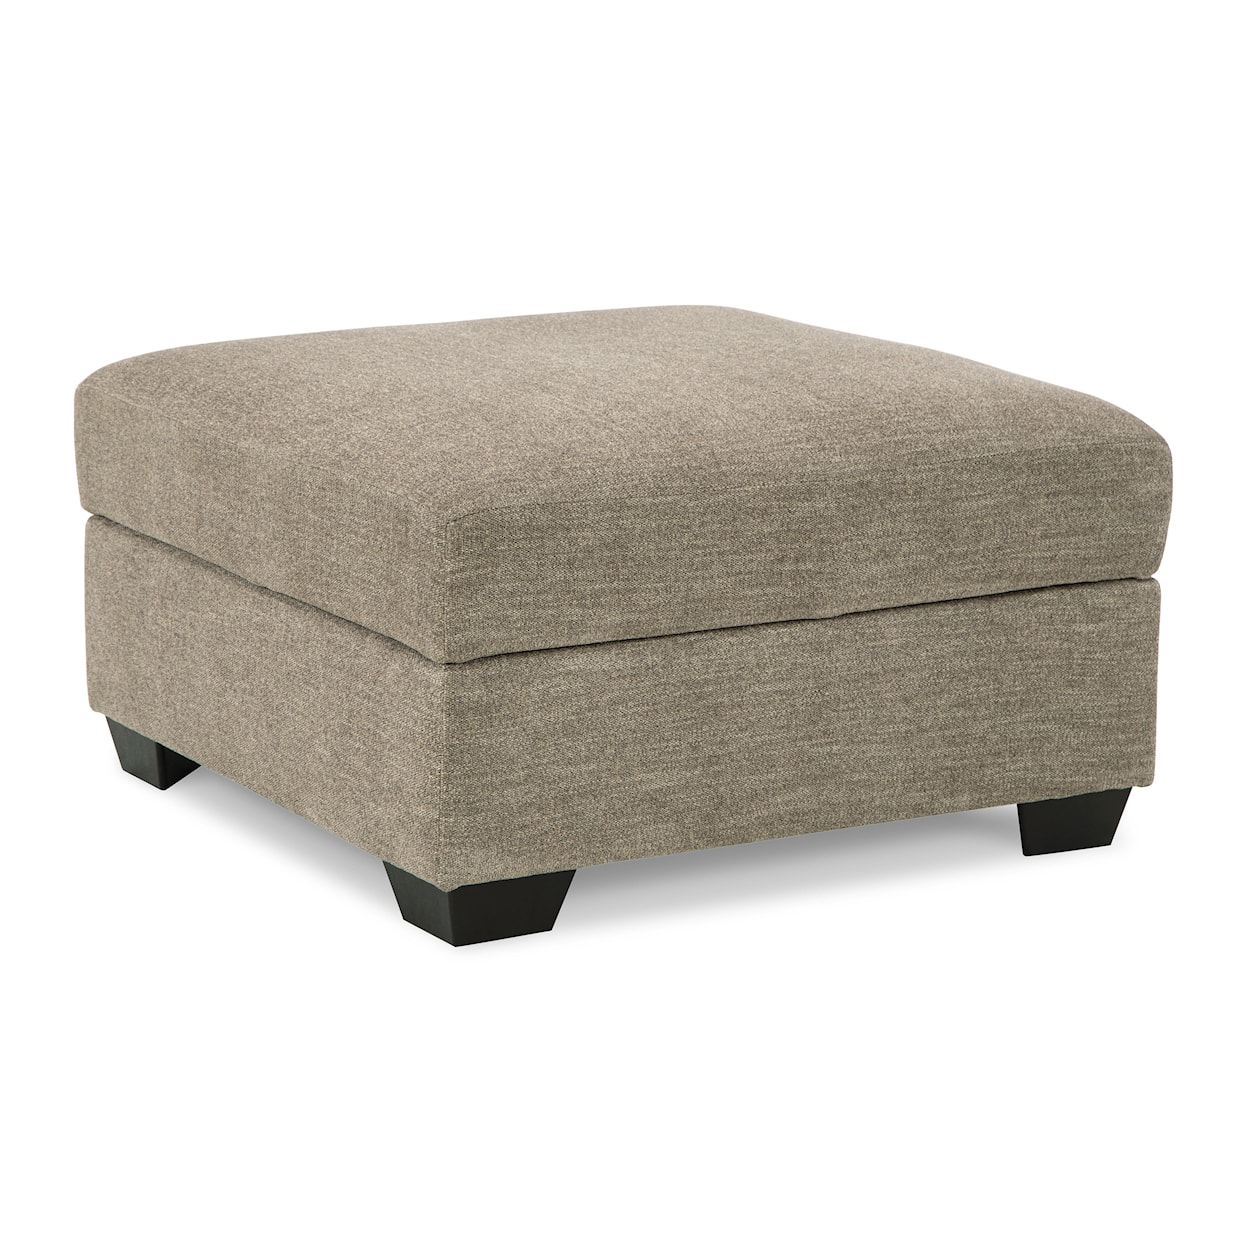 Signature Design by Ashley Furniture Creswell Ottoman With Storage